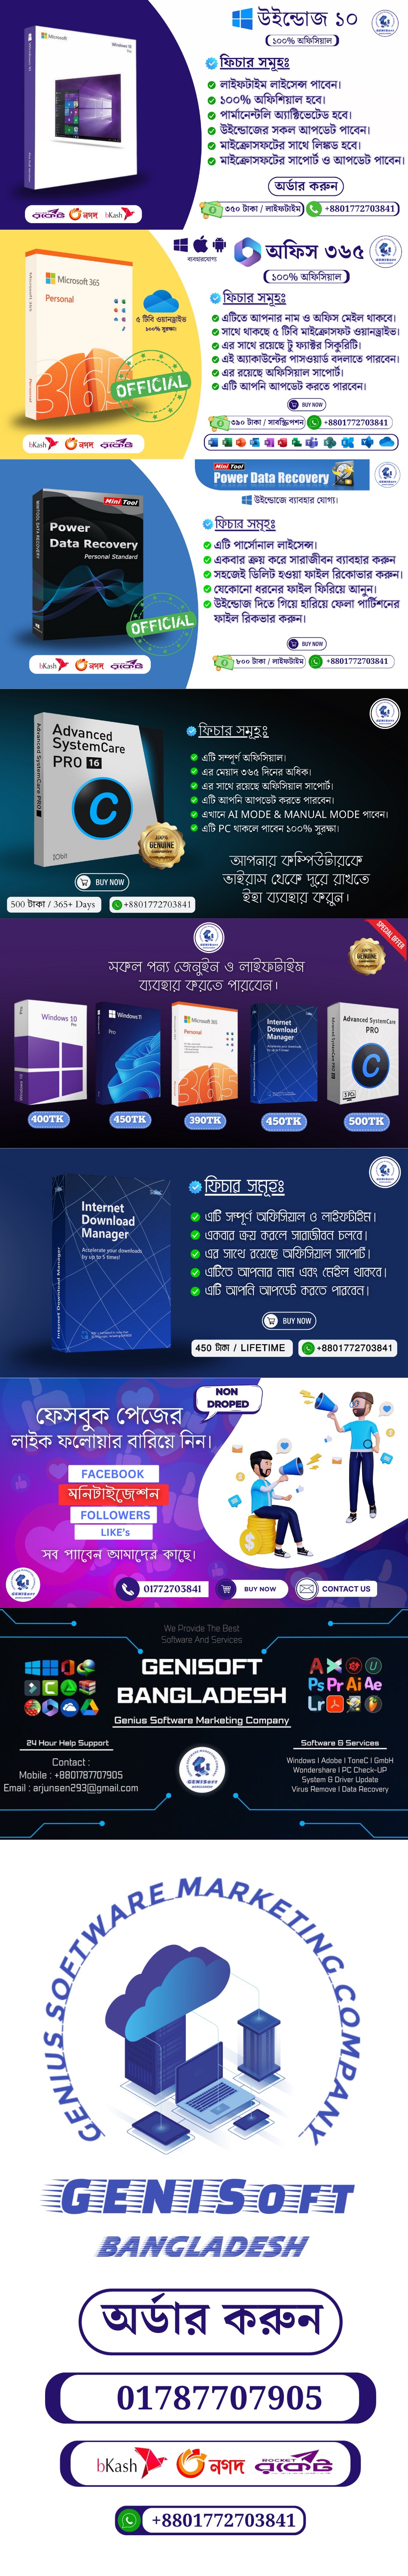 GENISOFT BANGLADESH SOME PRODUCTS AND PRICE LIST.jpg